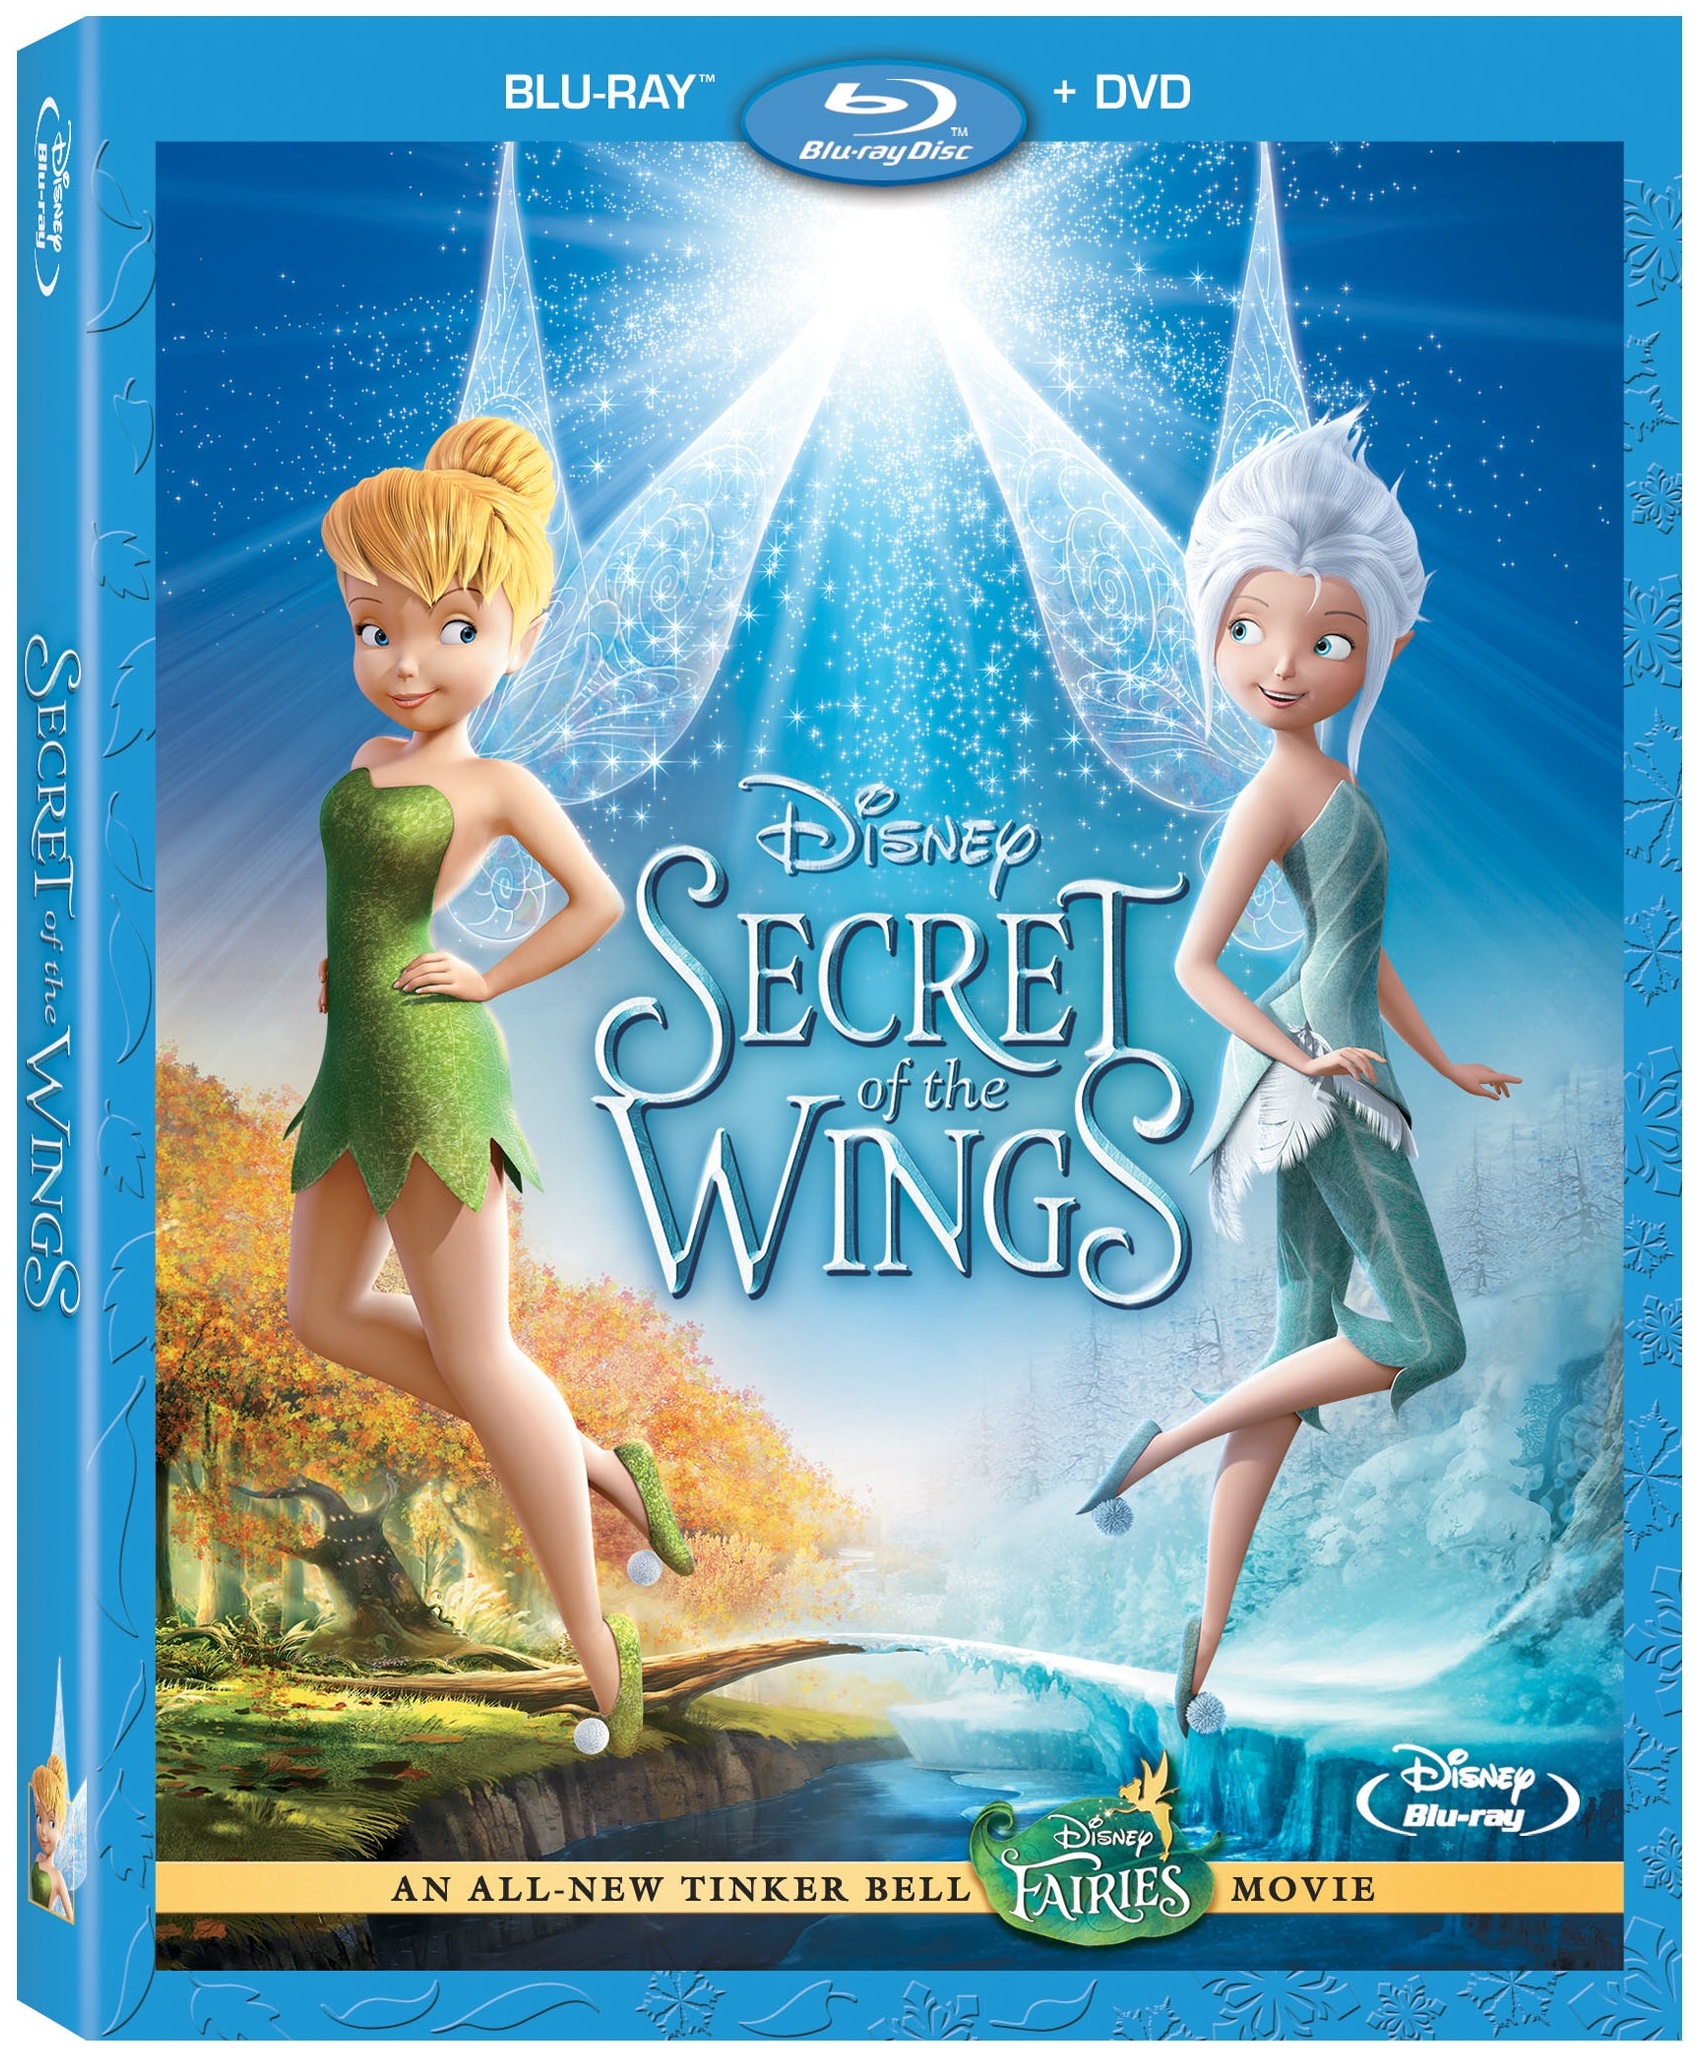 Disney’s Secret of the Wings Blu-ray Review